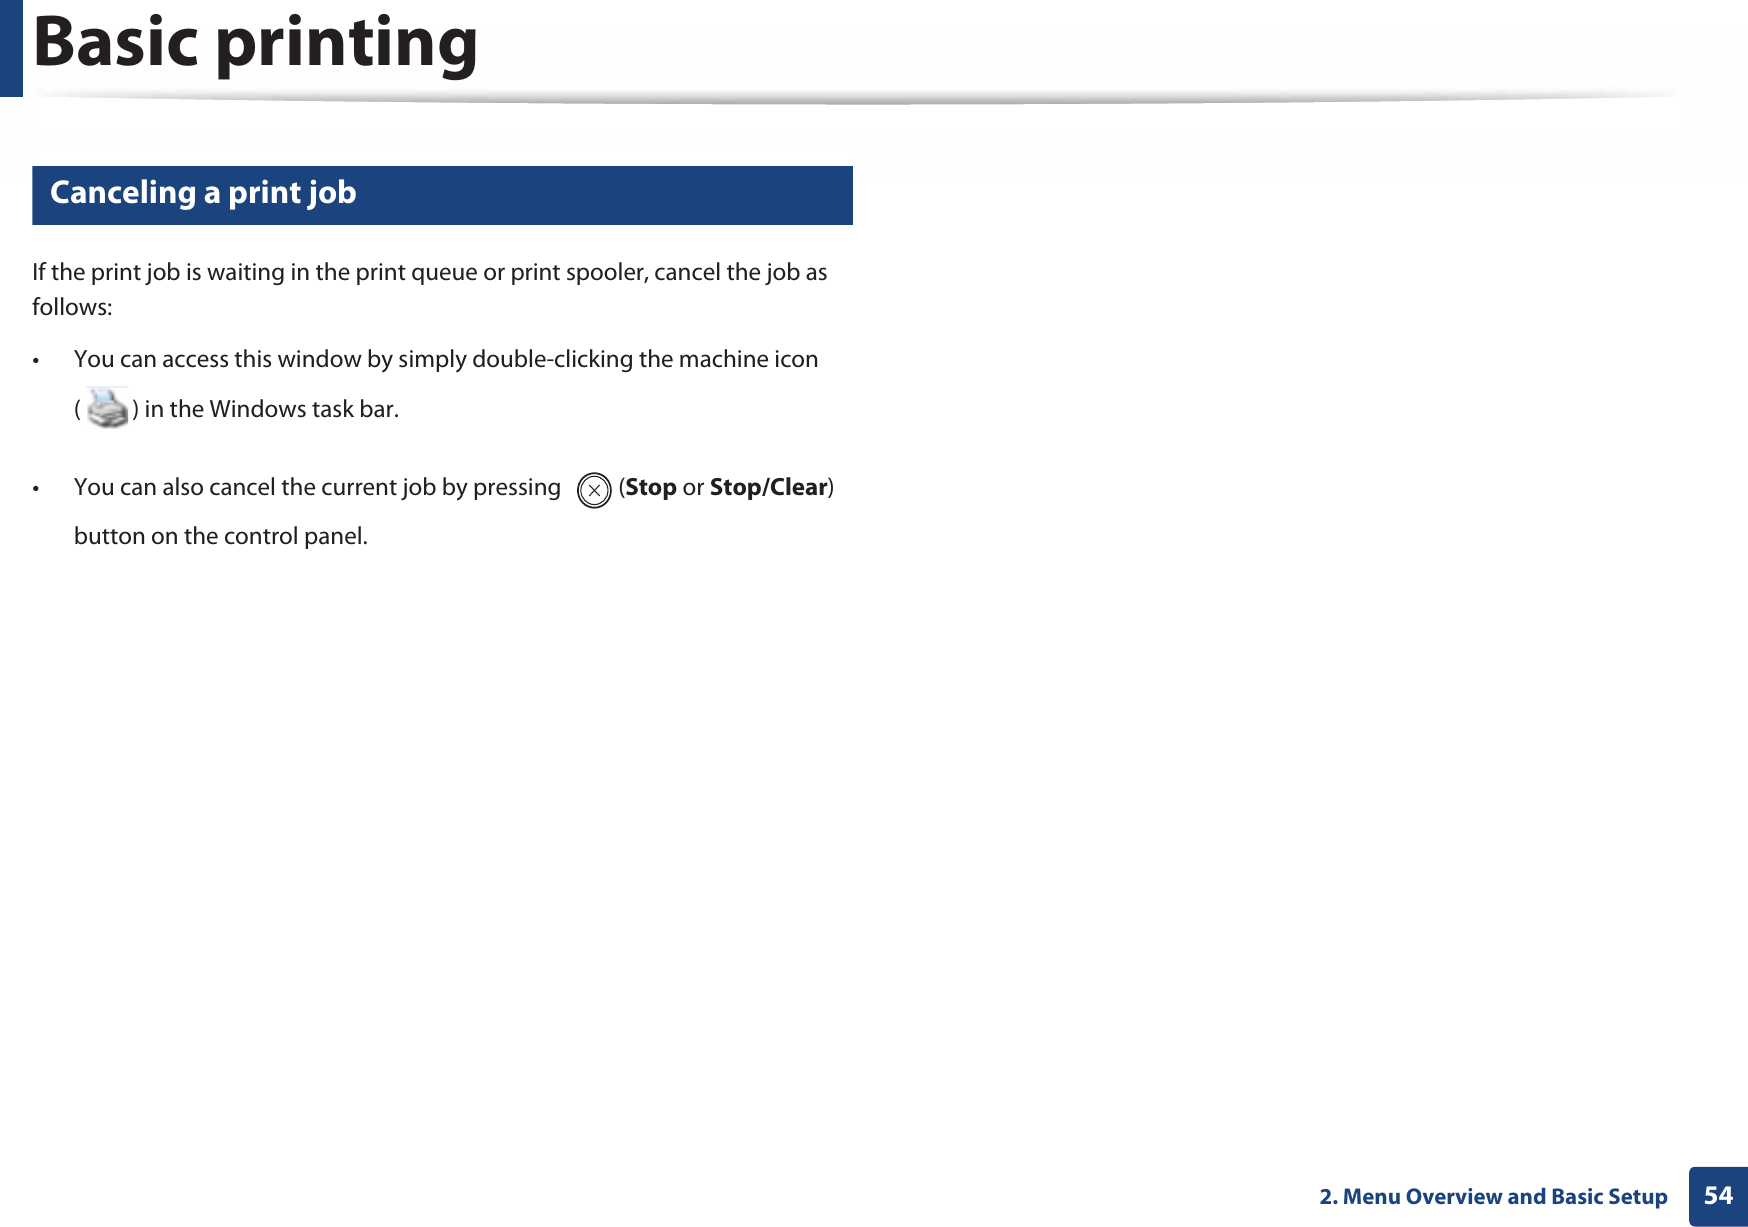 Basic printing542. Menu Overview and Basic Setup10 Canceling a print jobIf the print job is waiting in the print queue or print spooler, cancel the job as follows:• You can access this window by simply double-clicking the machine icon ( ) in the Windows task bar. • You can also cancel the current job by pressing  (Stop or Stop/Clear) button on the control panel.